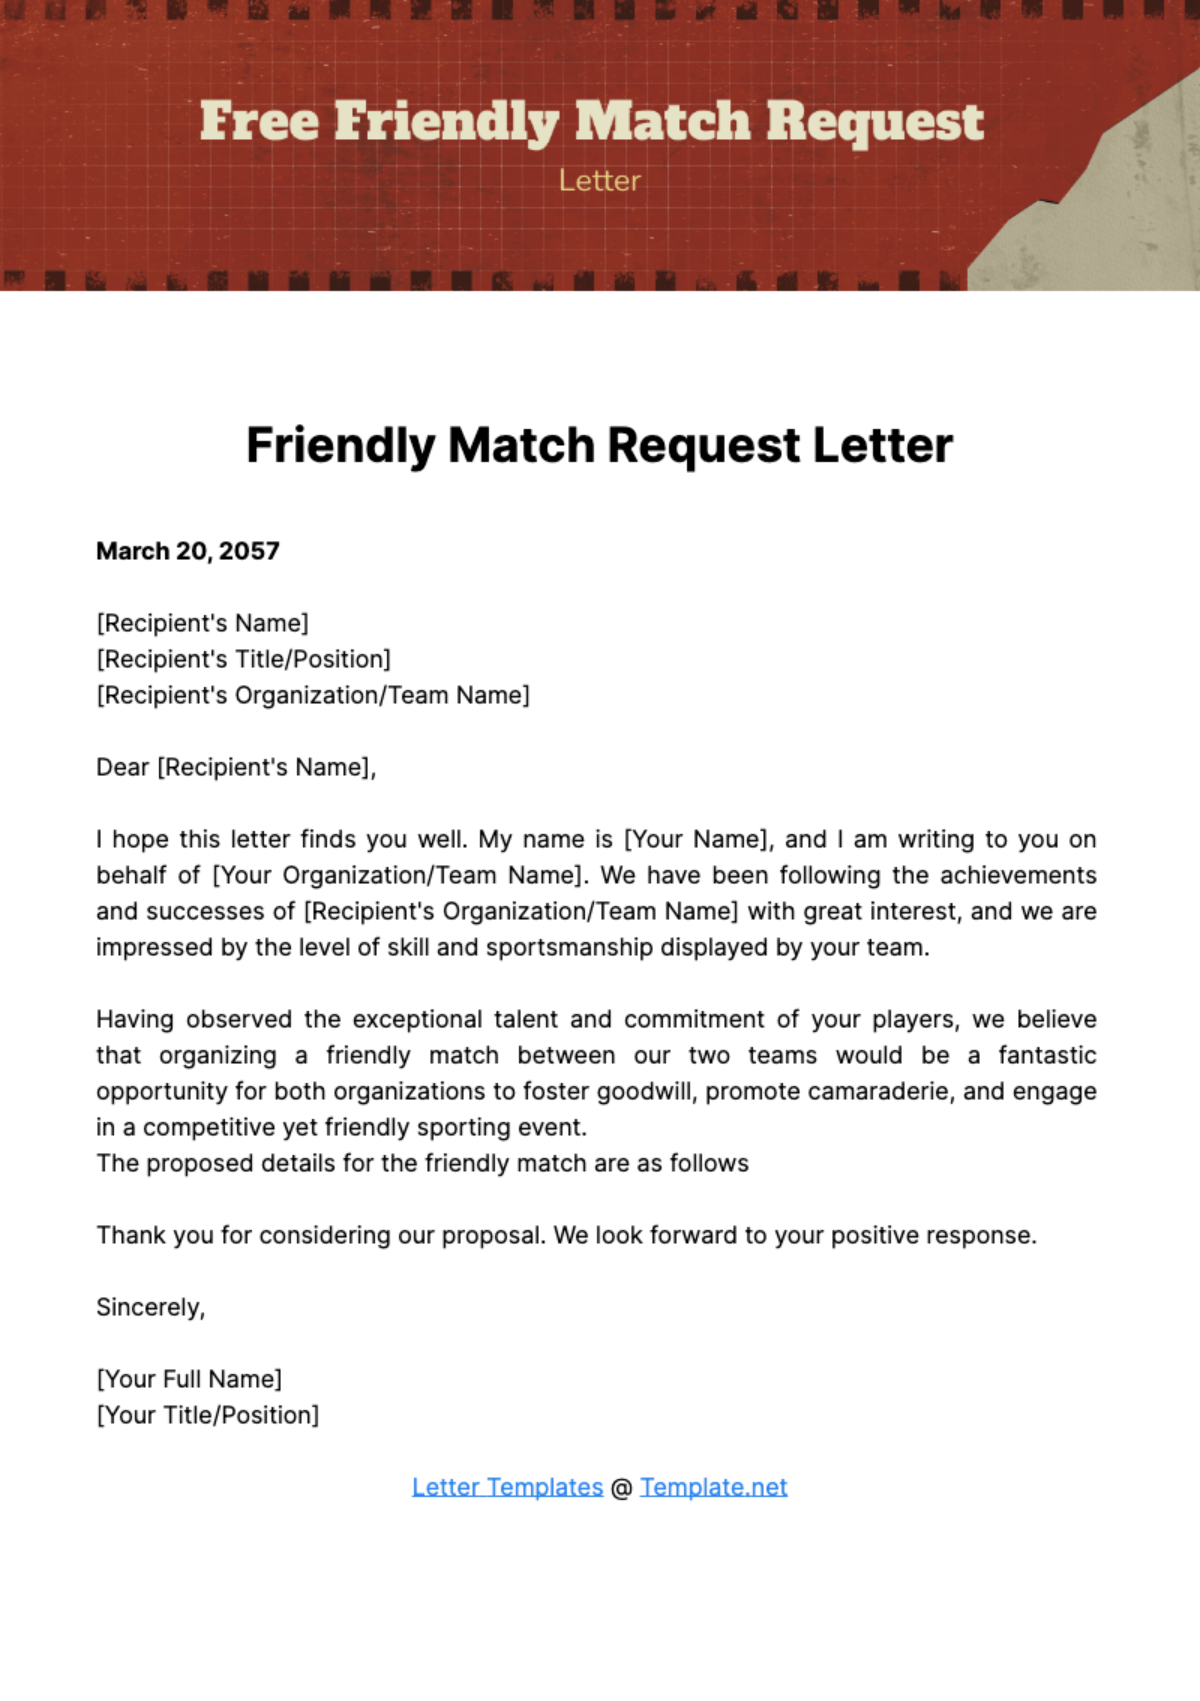 Free Friendly Match Request Letter Template